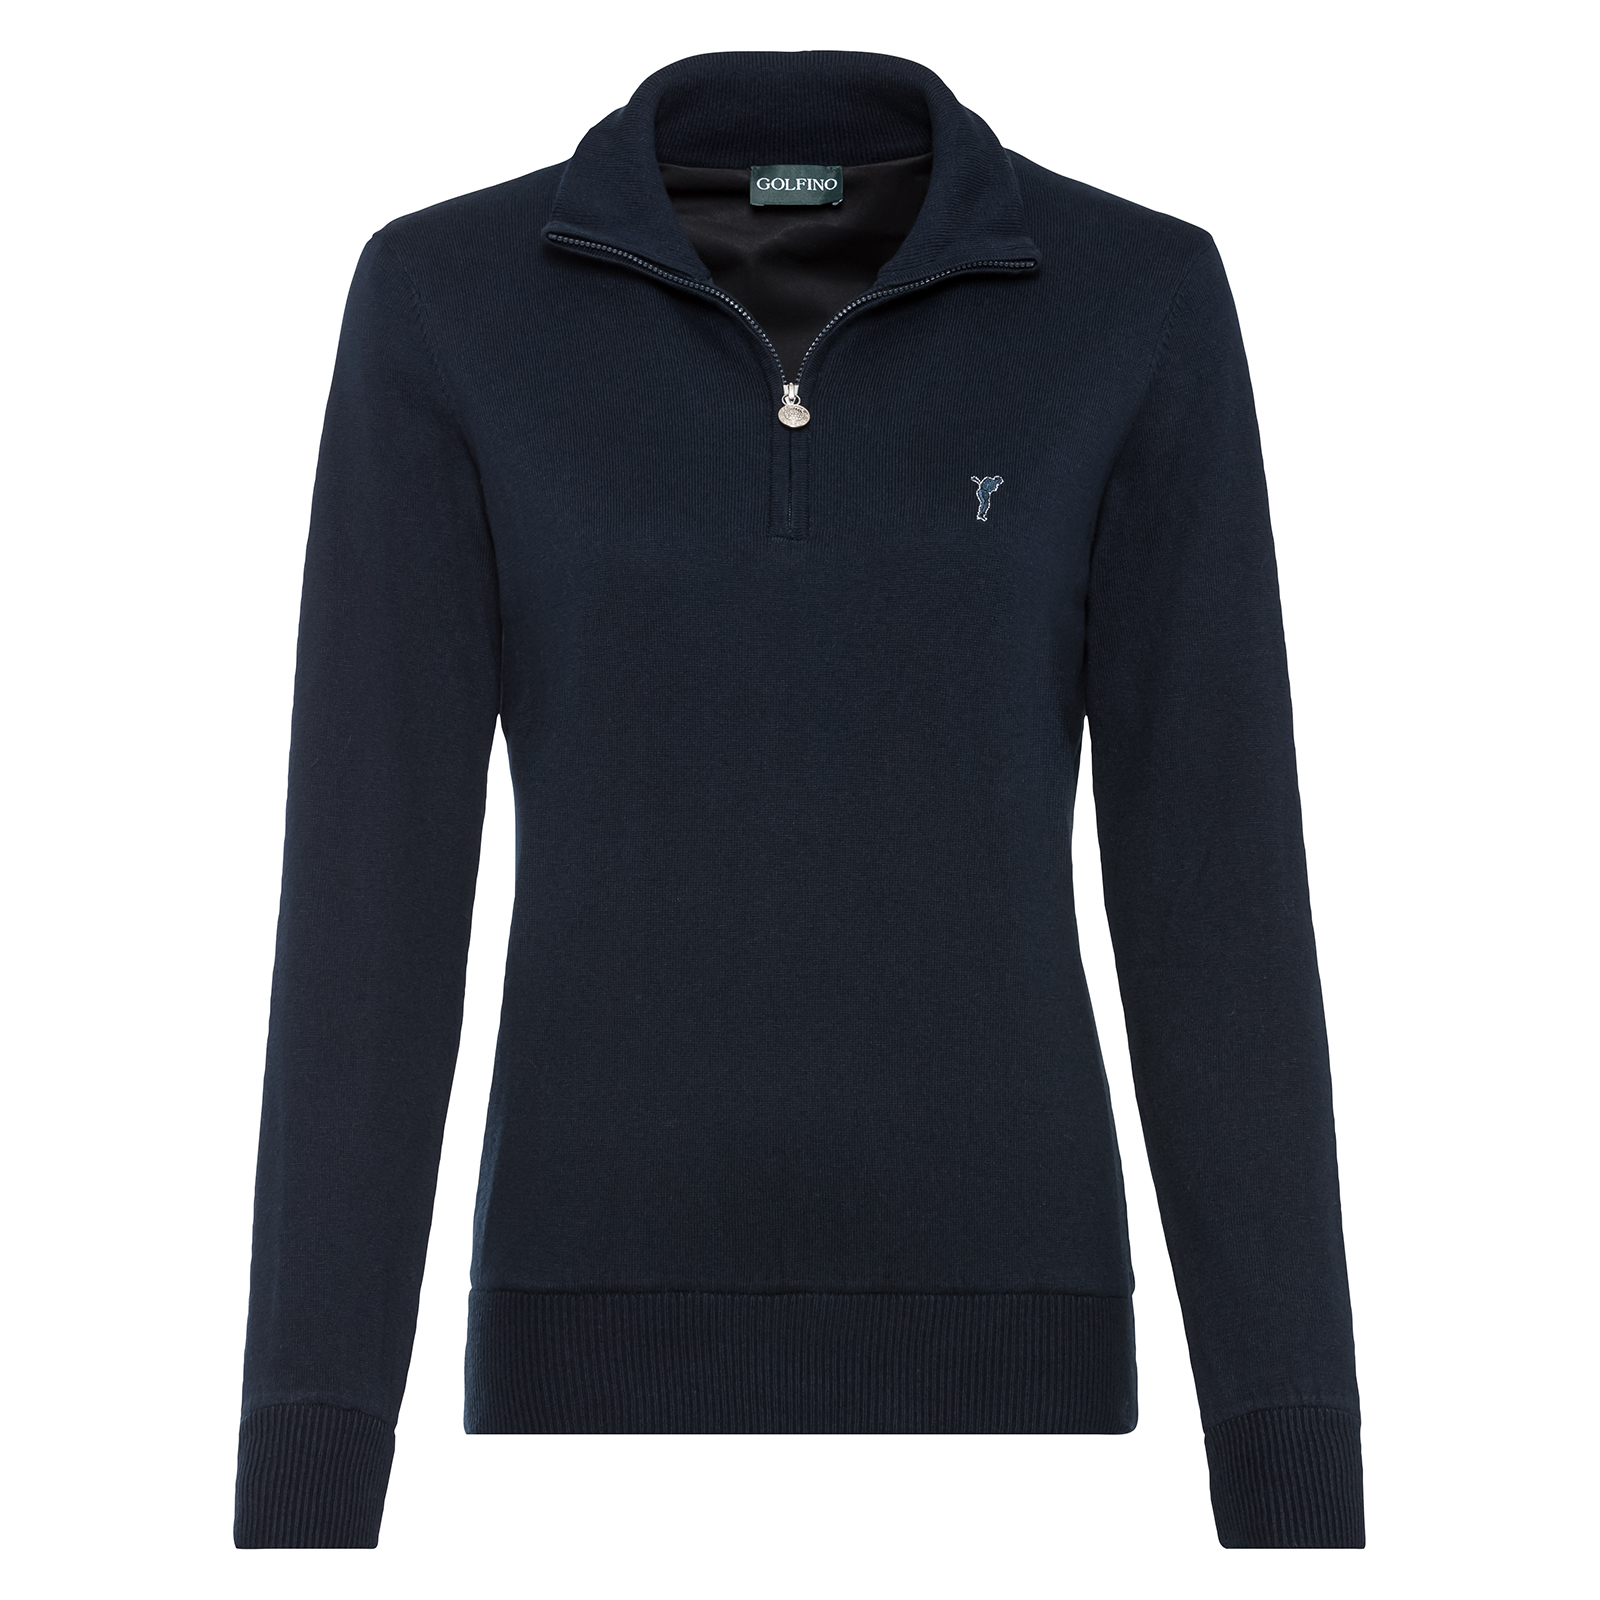 Ladies' sweater made of breathable knitted windstopper fabric 